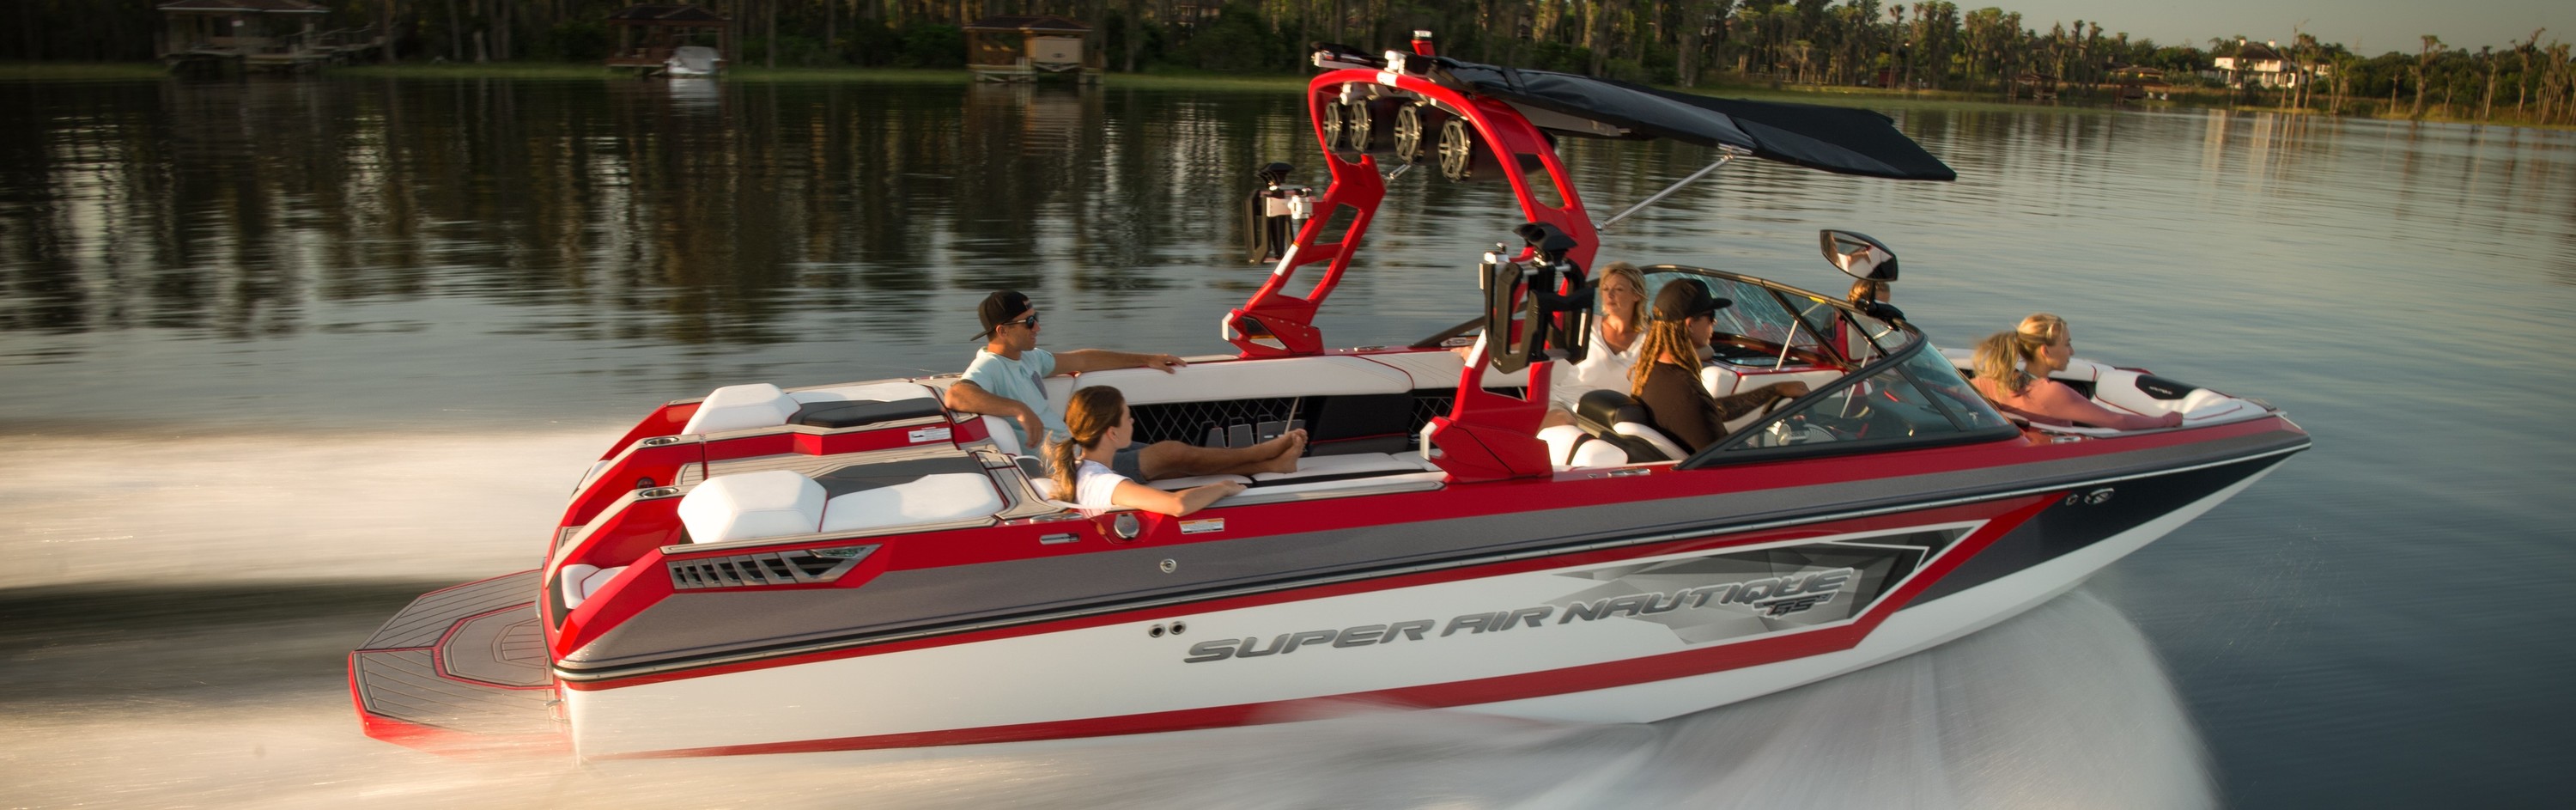 Nautique Boat for sale in Wawasee Boat Company, Syracuse, Indiana